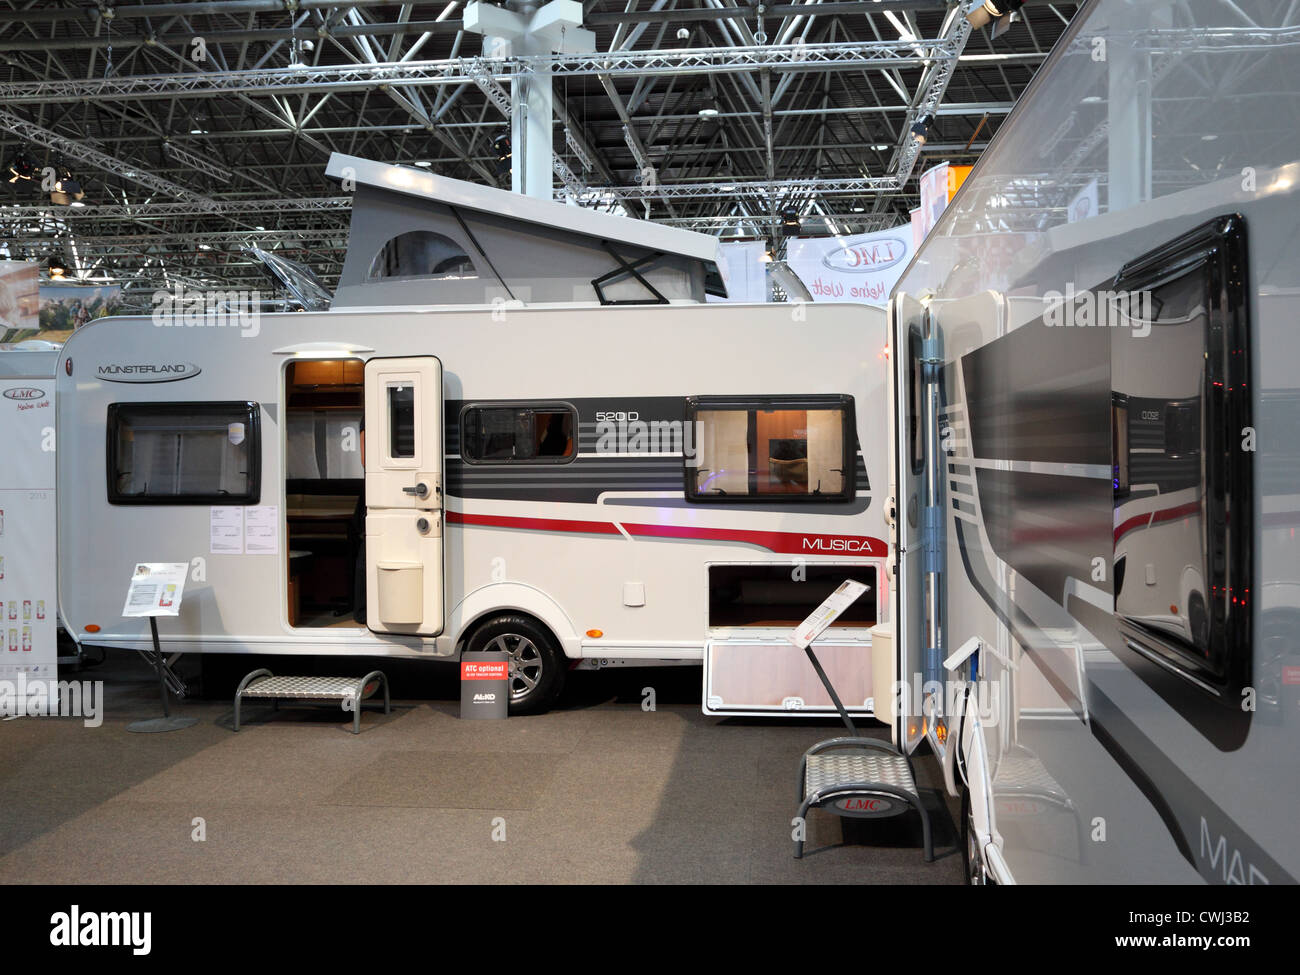 LMC Munserland mobile homes at the Caravan Salon Exhibition 2012 on August 27, 2012 in Dusseldorf, Germany Stock Photo